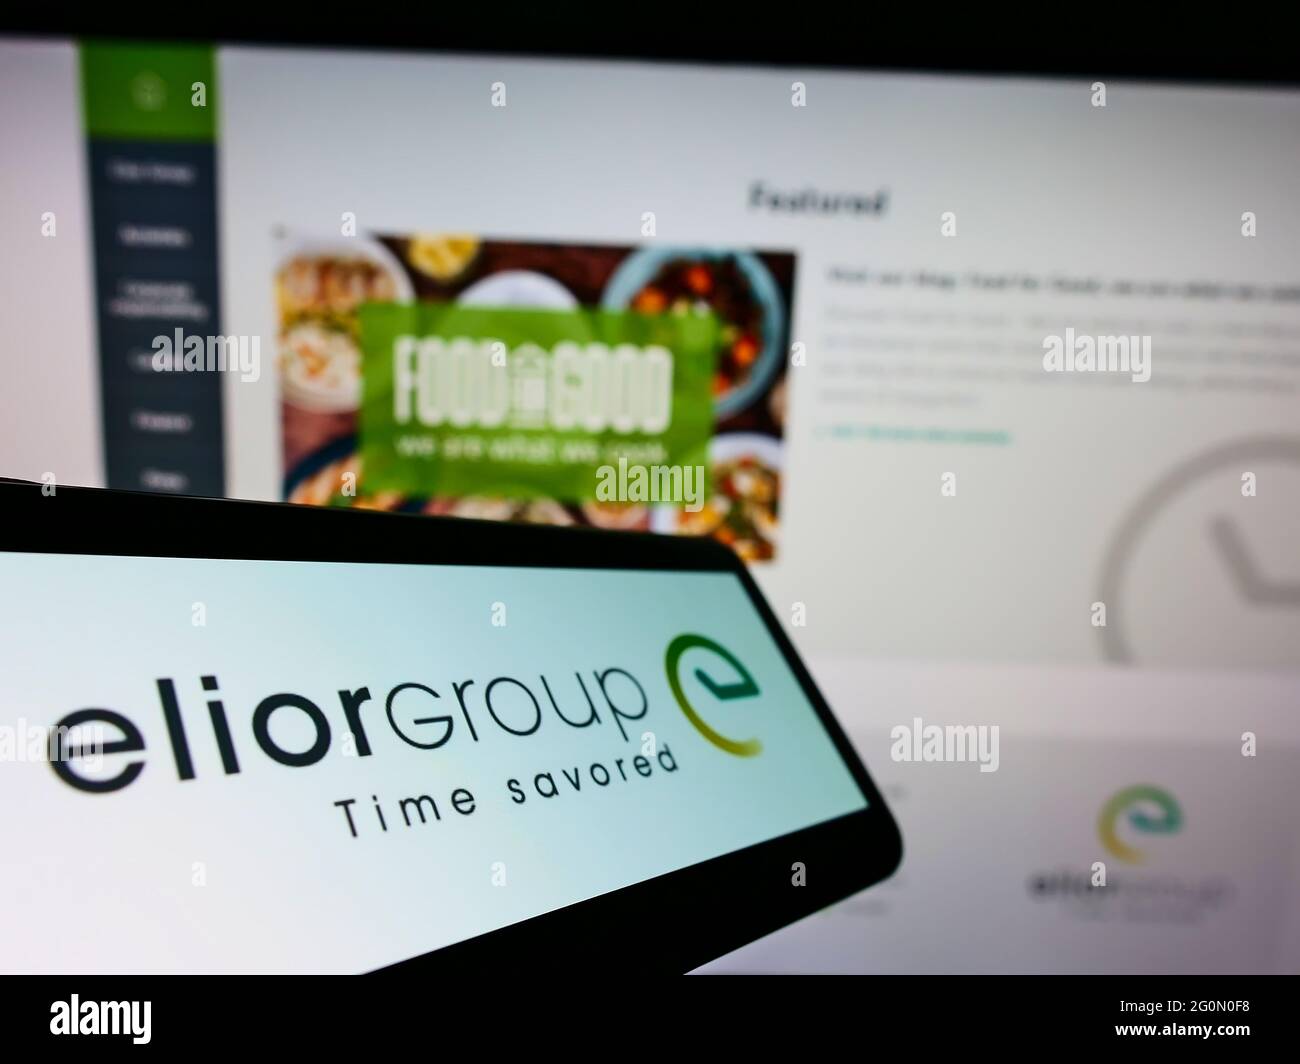 Cellphone with logo of French contract catering company Elior Group on screen in front of business website. Focus on center-right of phone display. Stock Photo